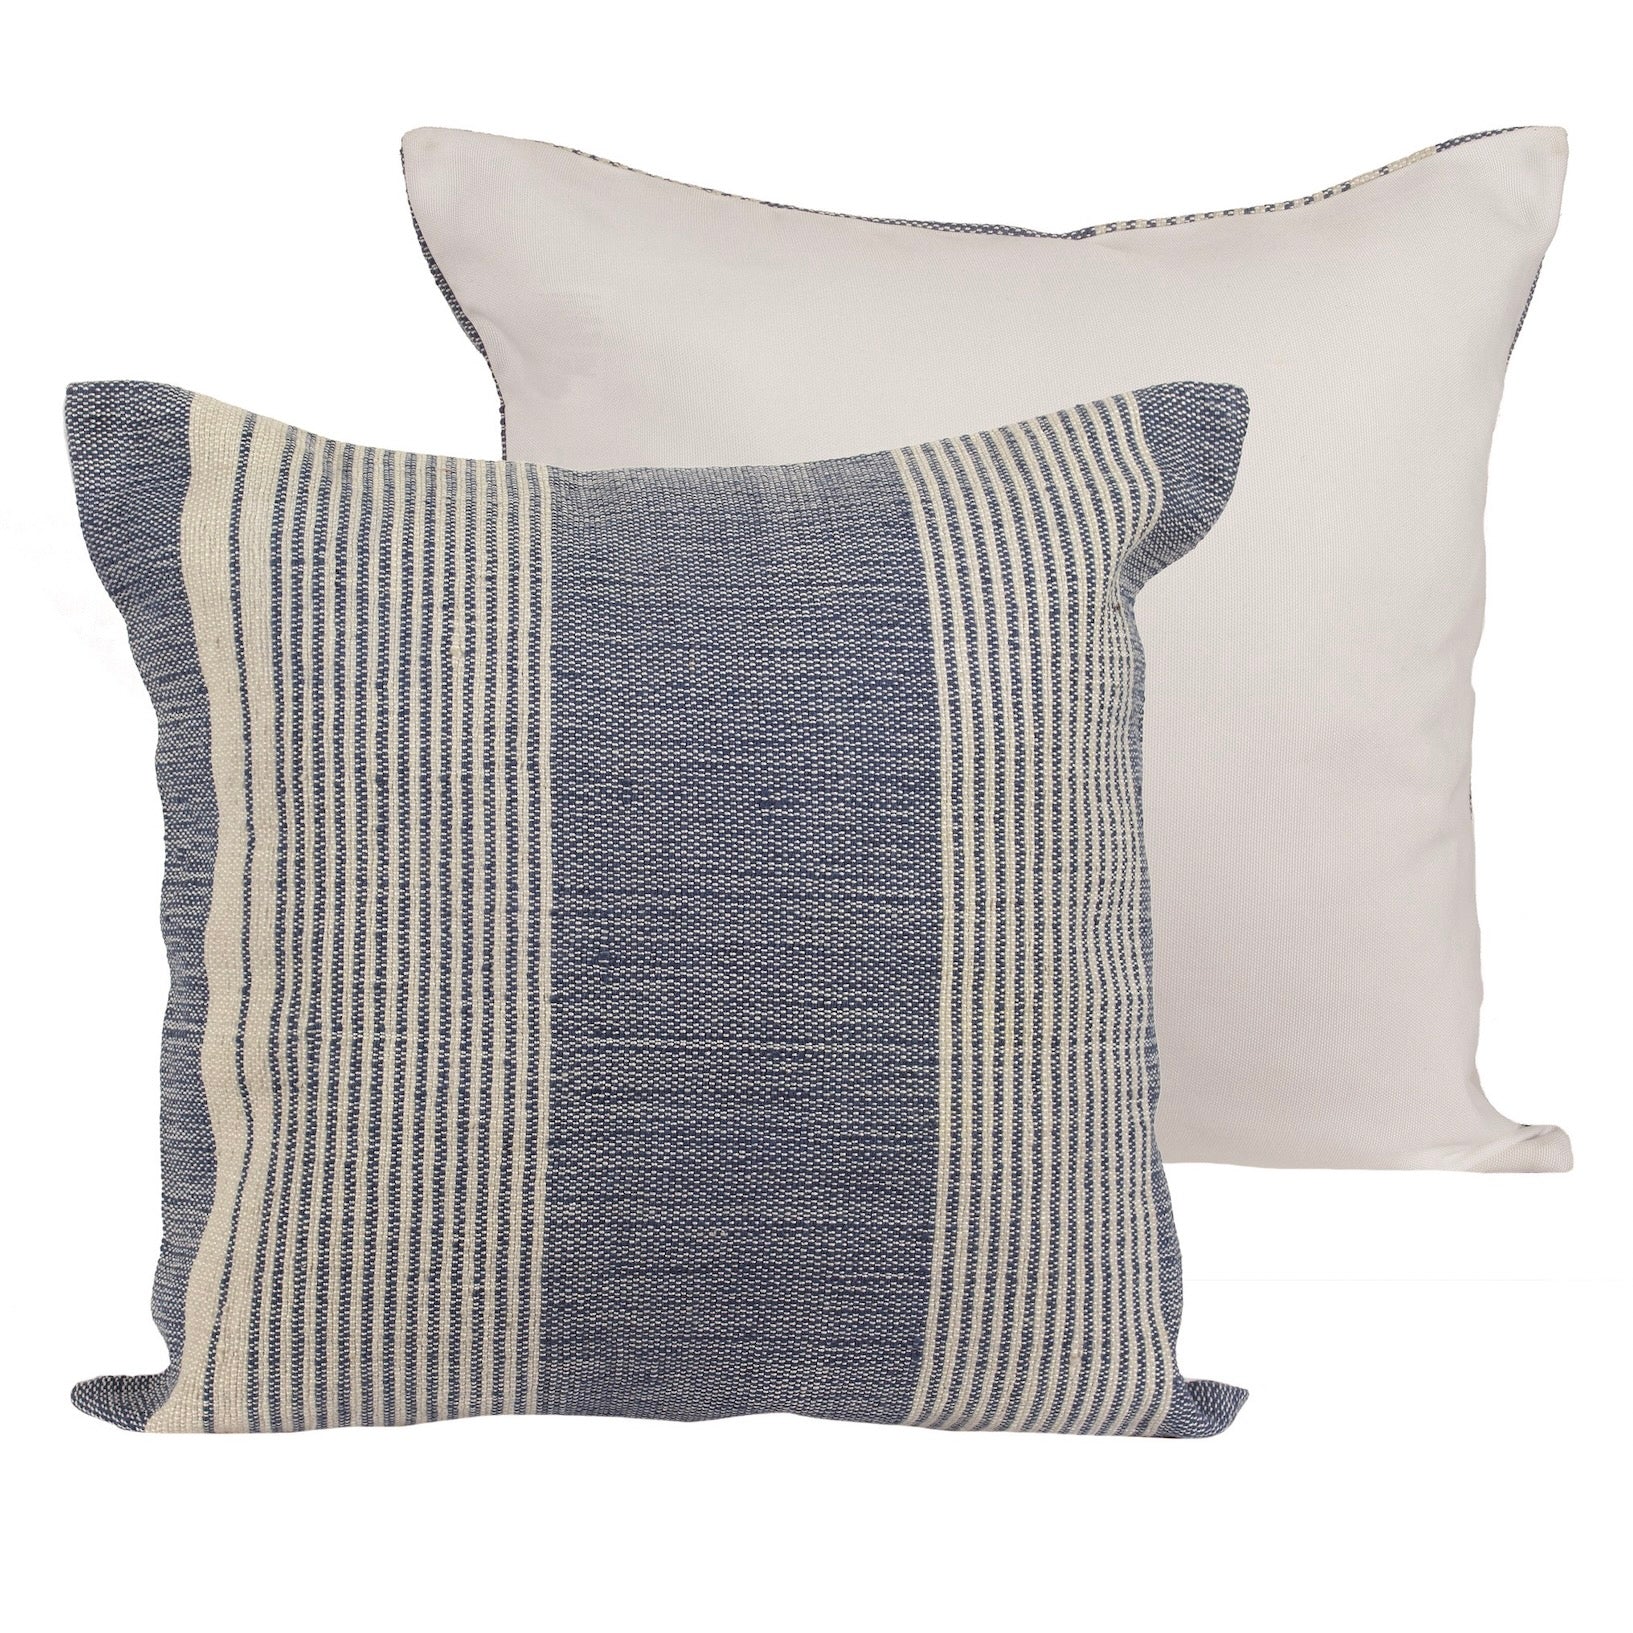 Navy Stripe Square Outdoor Pillow